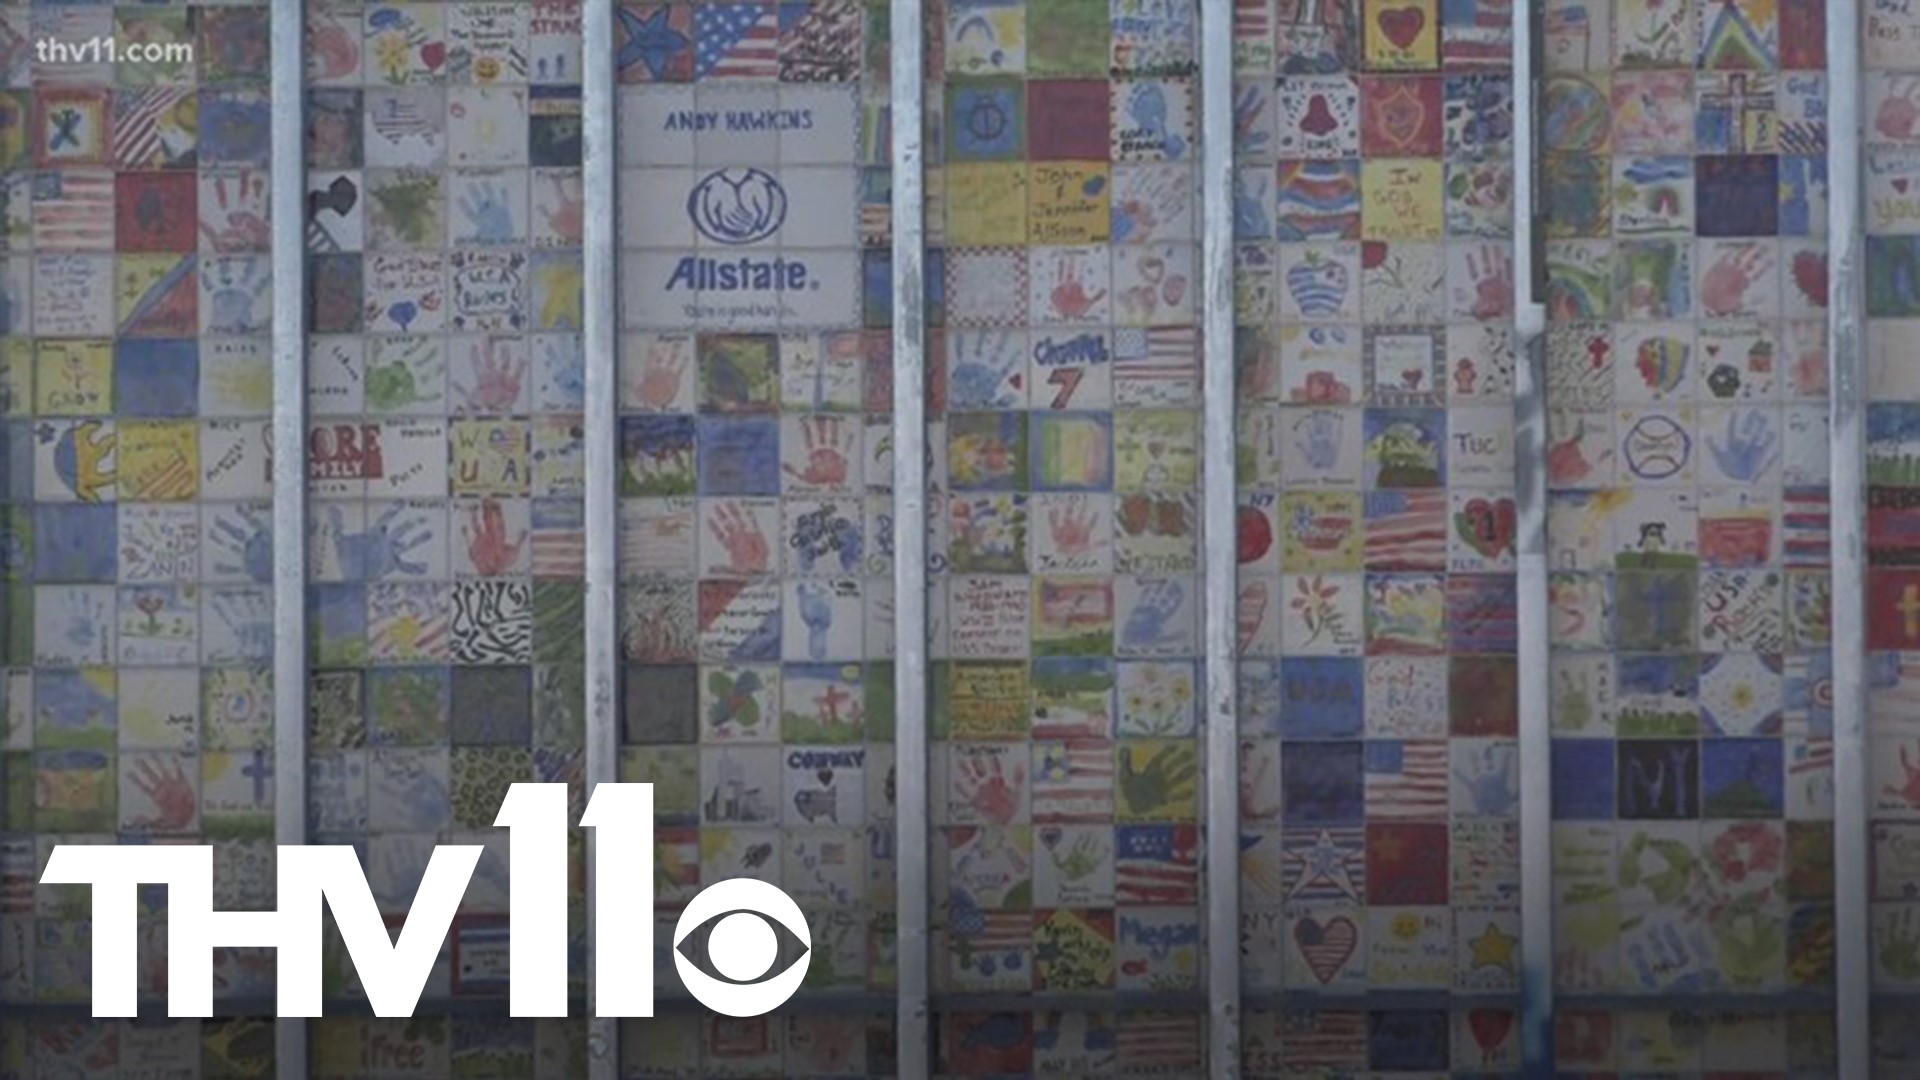 Two decades ago a group of kids in Conway, with the help of their families, created a 9/11 tribute. Now the art is being covered up as part of a new project.